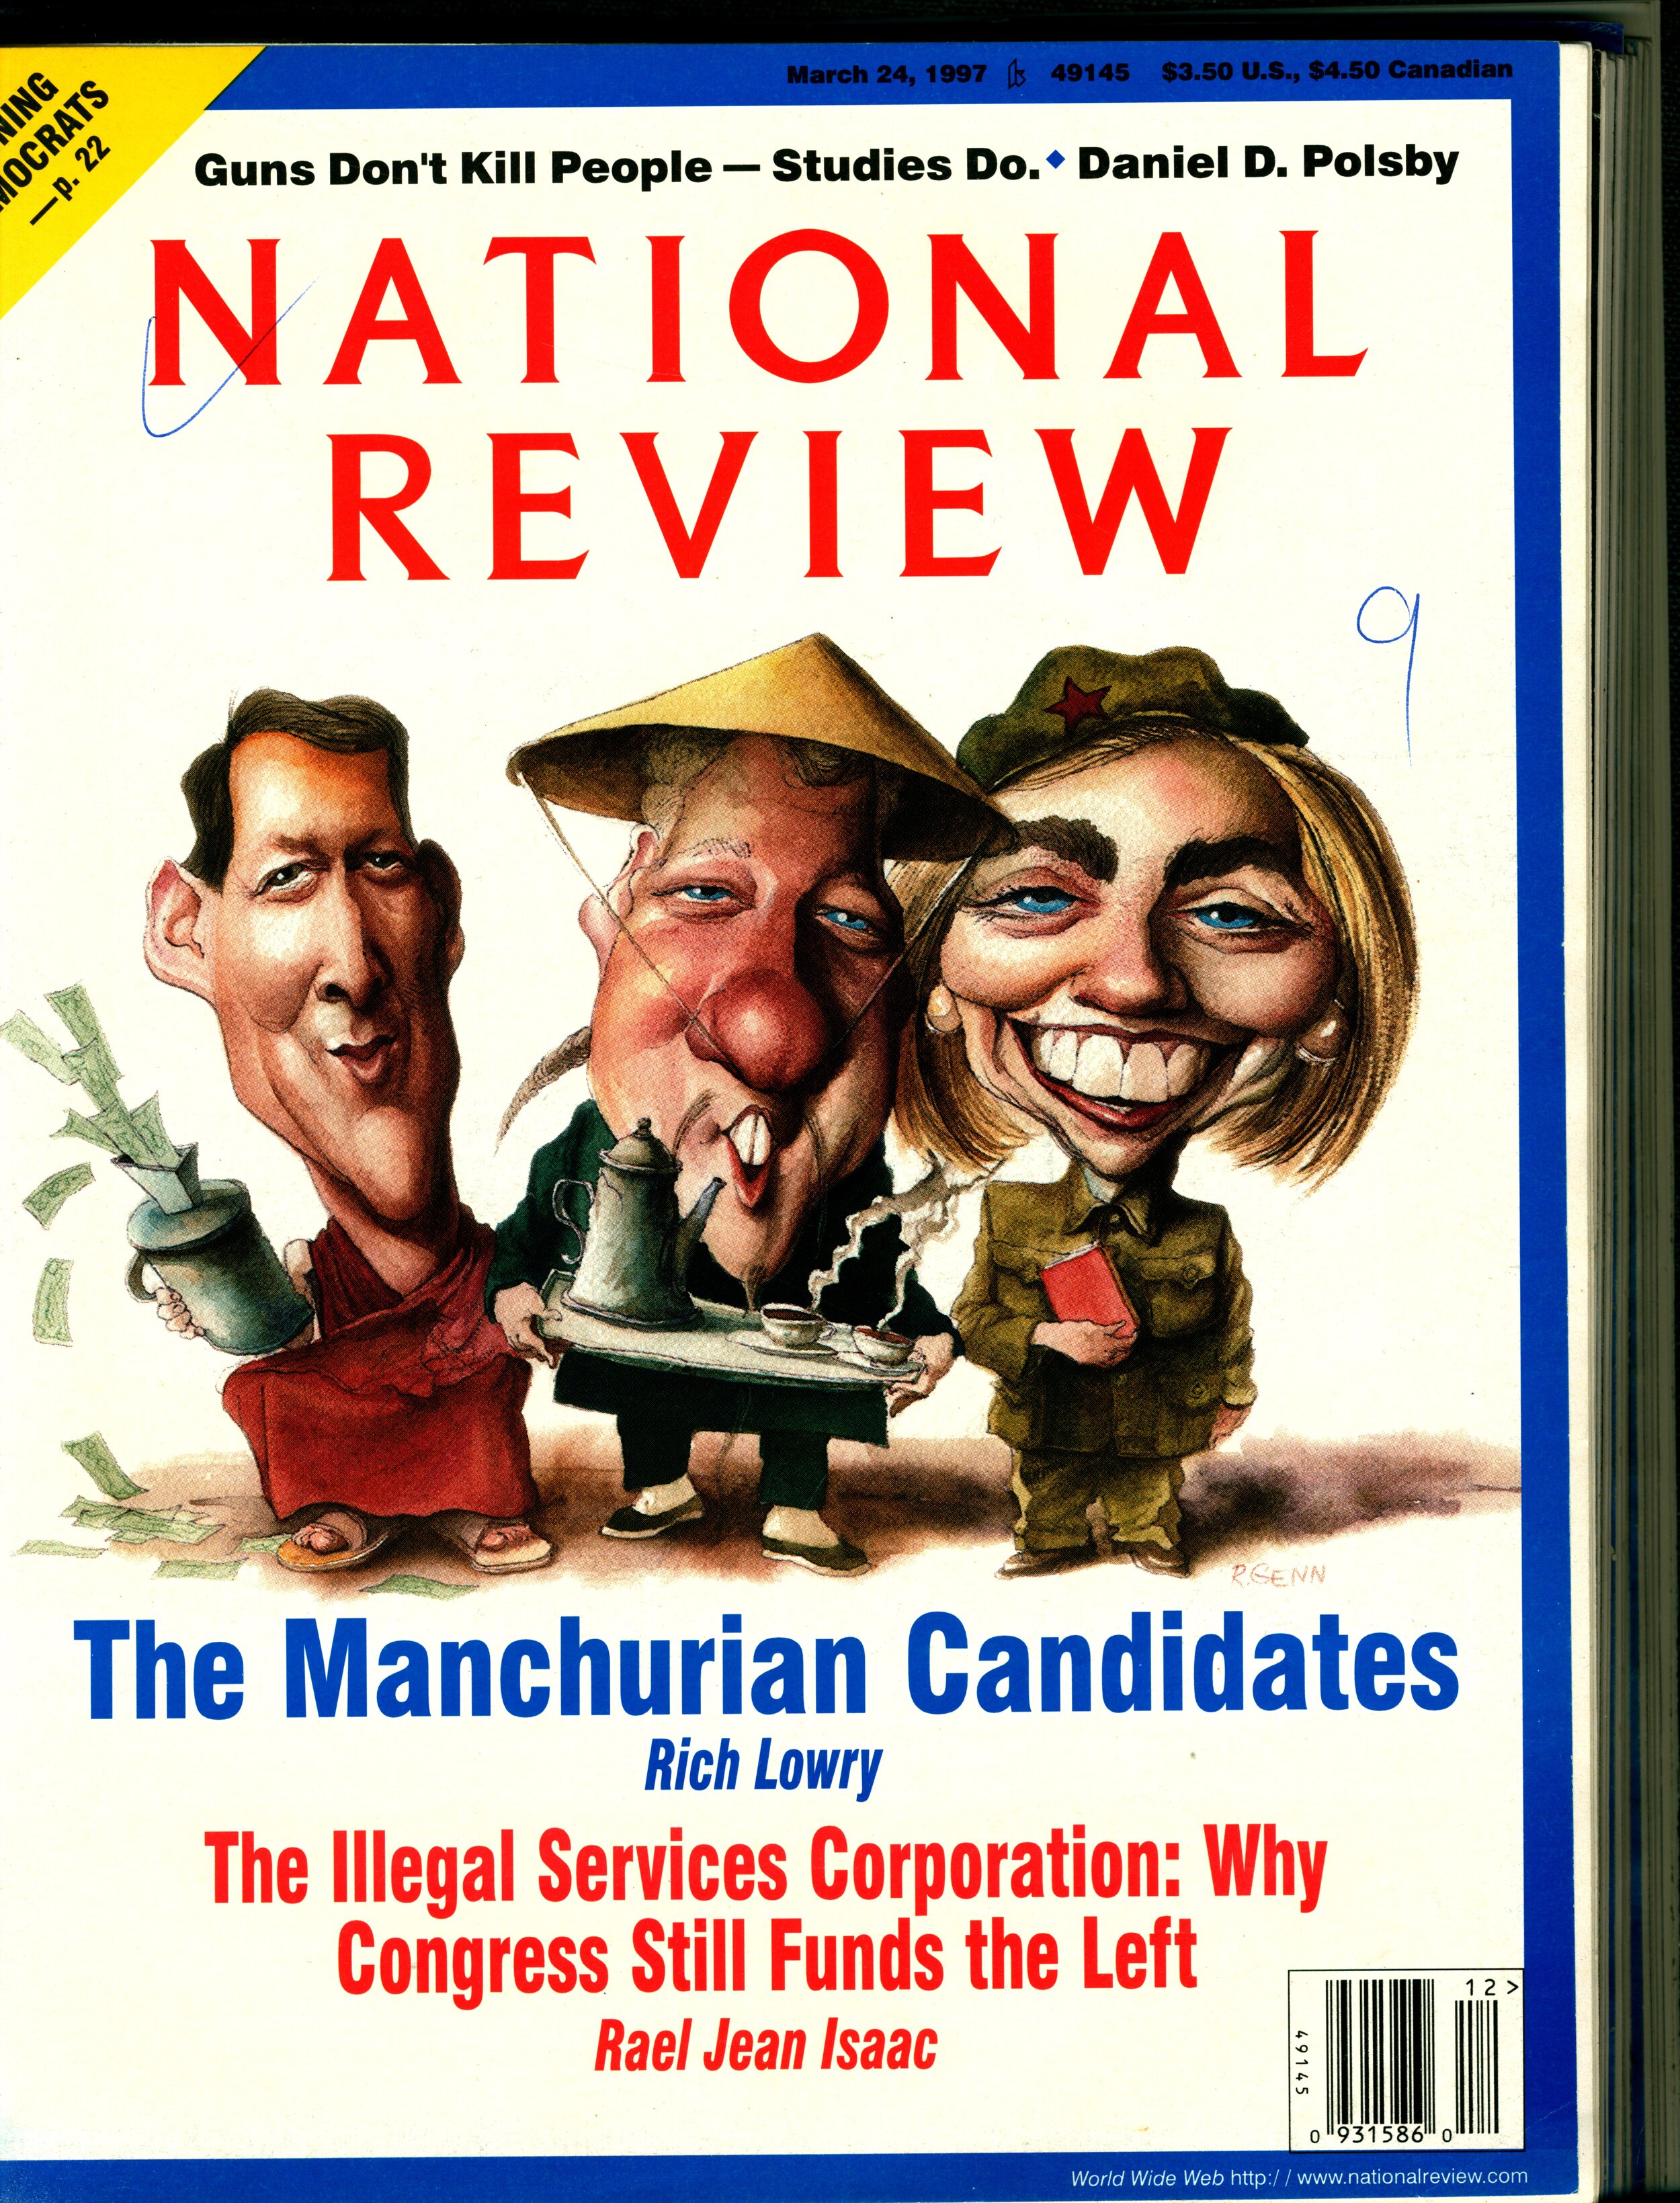  Racist stereotypes in the United States still persist. This cover of The National Review comes from March 1997. 